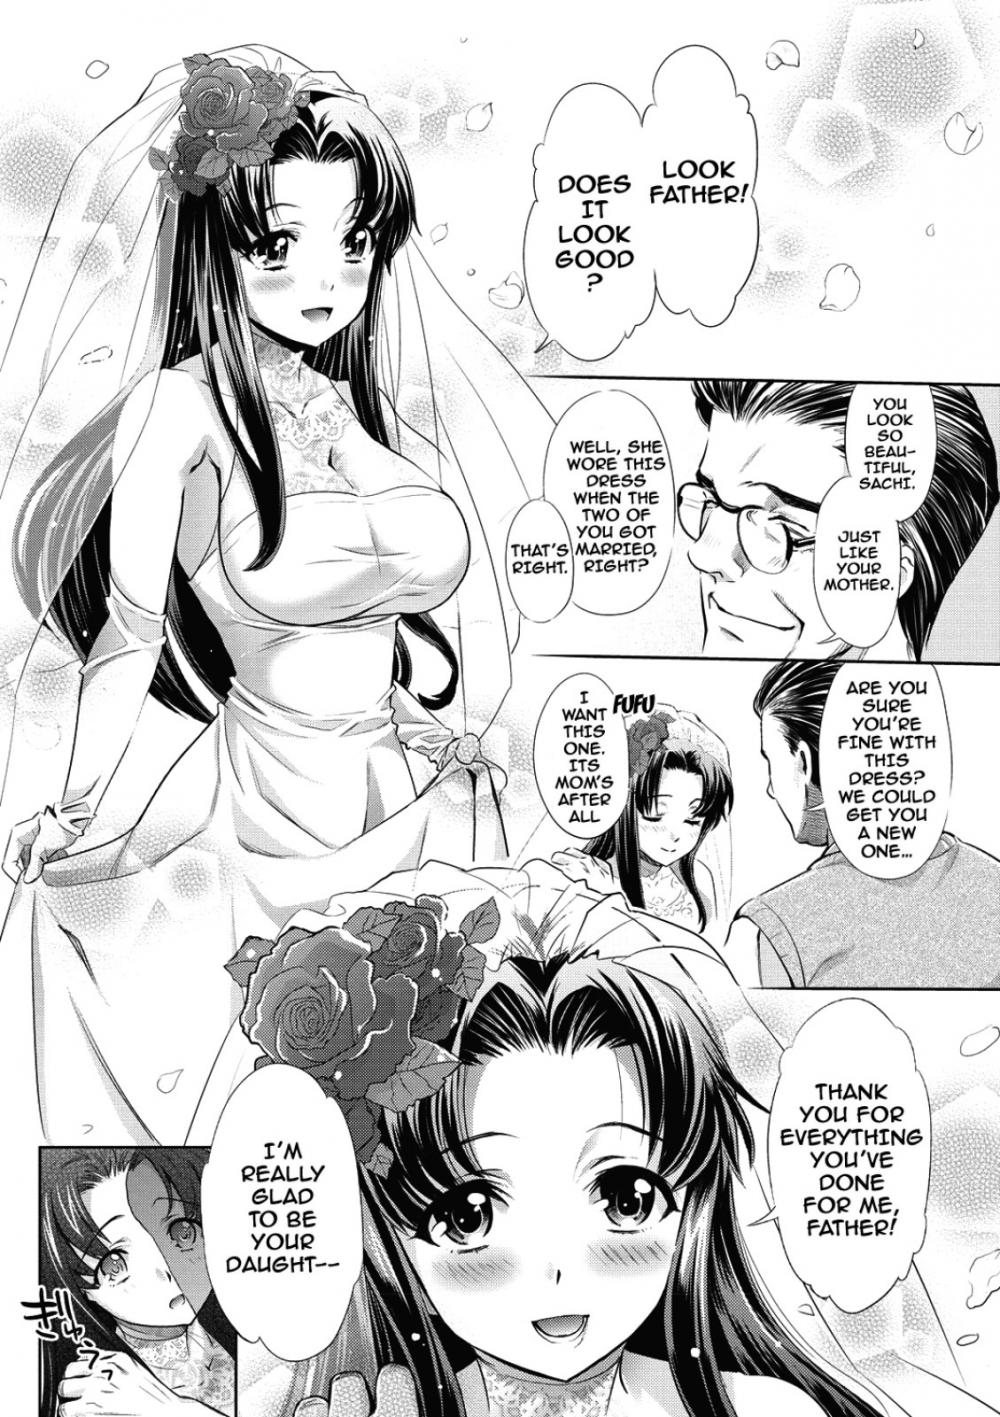 Hentai Manga Comic-From Now On She'll Be Doing NTR-Chapter 7-6